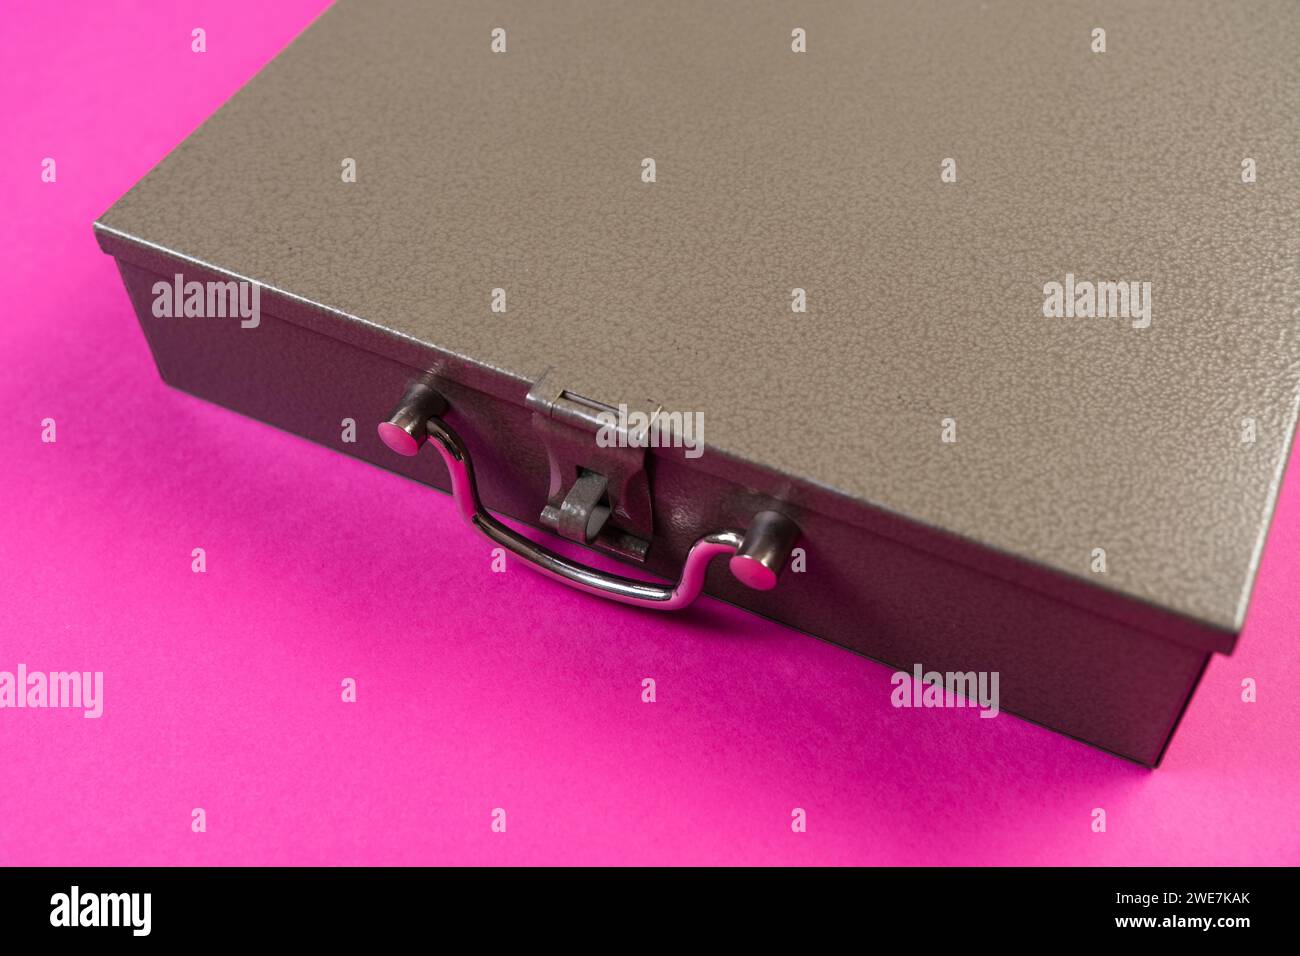 Cash box of a bank safe deposit box in front of a monochrome pink background Stock Photo